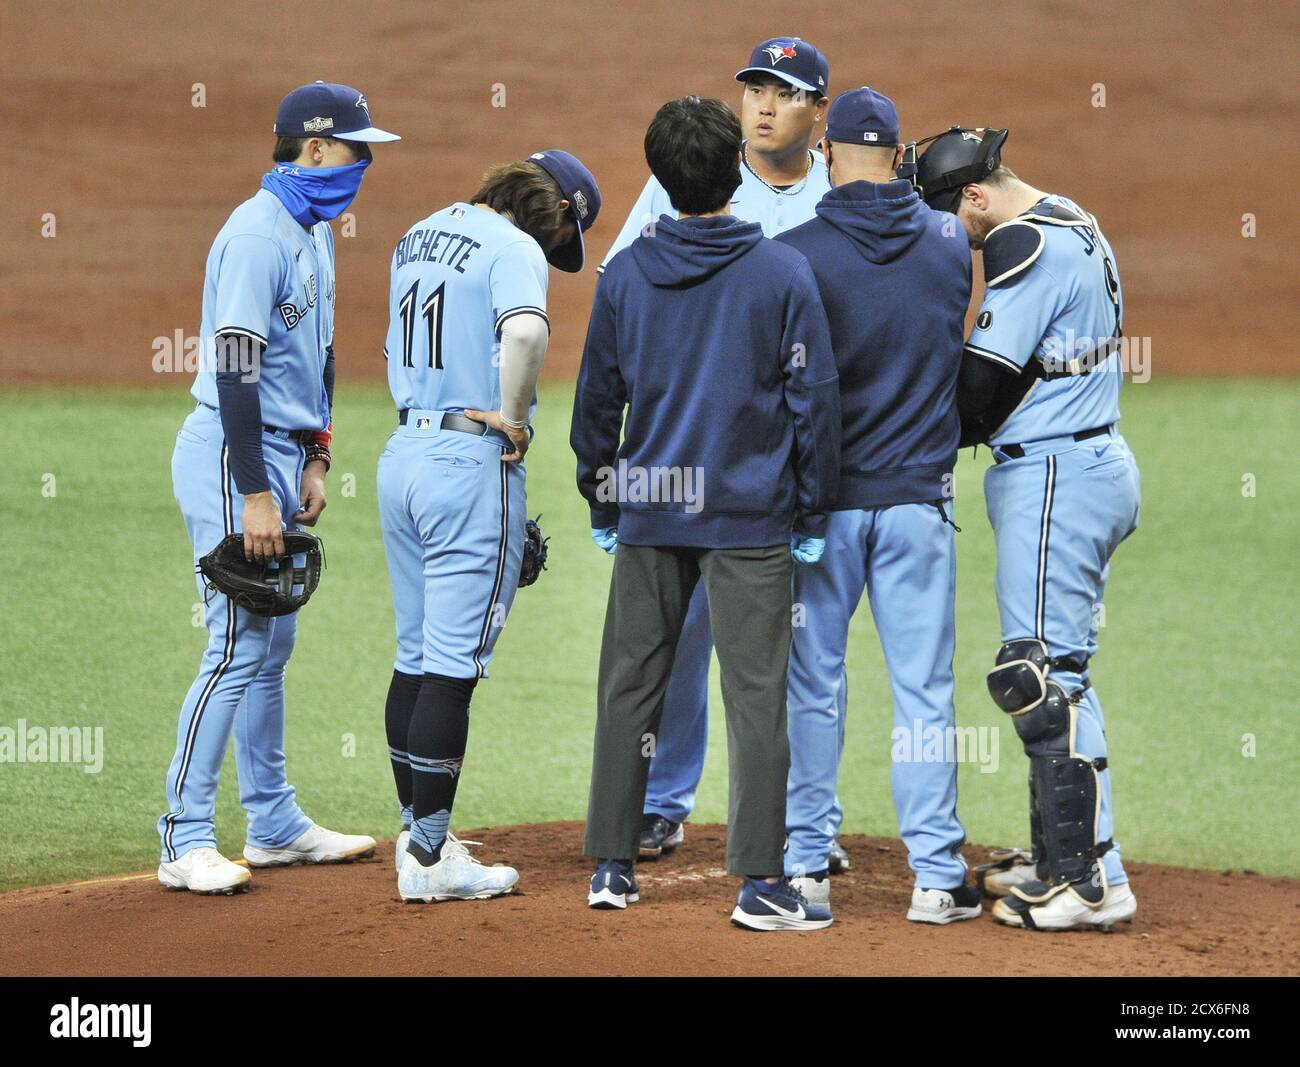 St. Petersburg, United States. 30th Sep, 2020. Toronto Blue Jays, from L-R, Cavan Biggio, Bo Bichette, Pitcher Hyun-Jin Ryu, pitching coach Pete Walker and catcher Danny Jansen talk on the mound in the second inning of their American League Wild Card Series game against the Tampa Bay Rays at Tropicana Field in St. Petersburg, Florida on Wednesday, September 30, 2020. Photo by Steve Nesius/UPI Credit: UPI/Alamy Live News Stock Photo